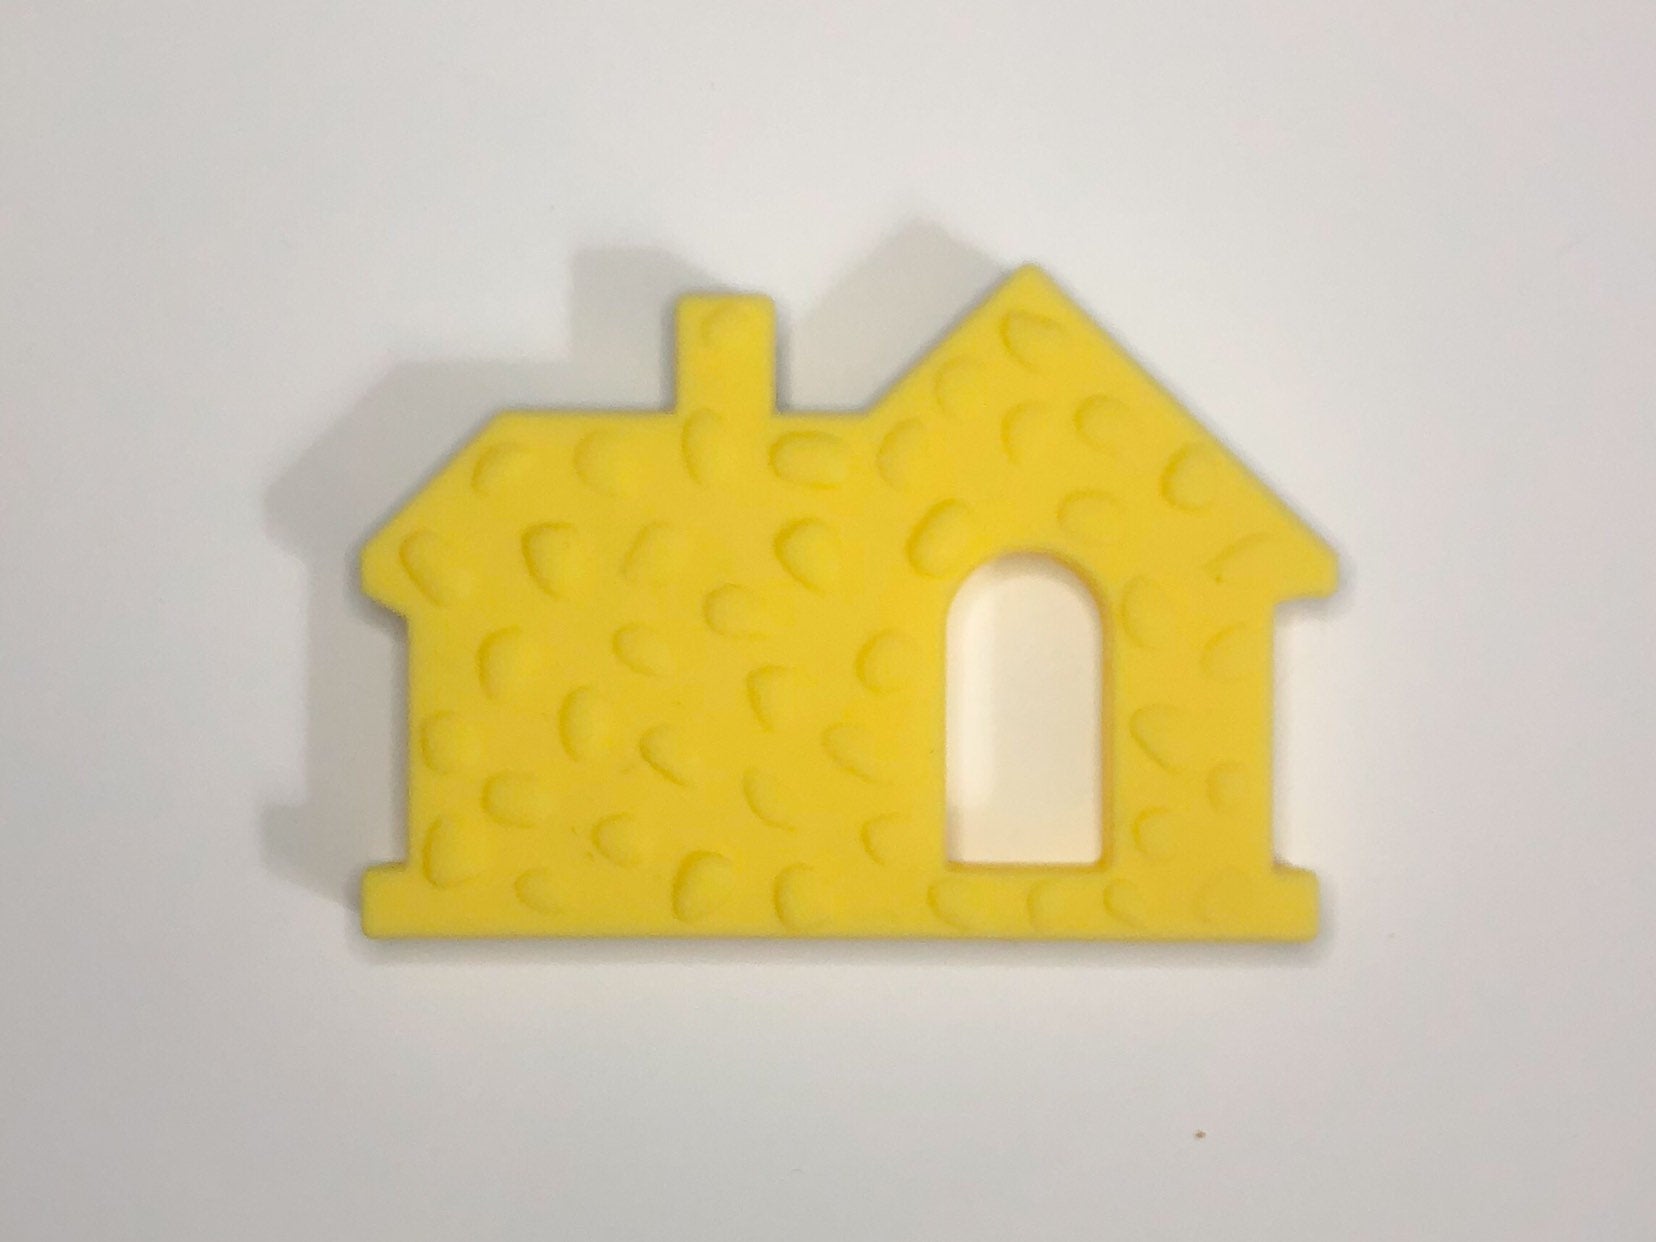 Silicone House Teether in Yellow - Silicone Teething, Silicone Teether, Teething Pendant